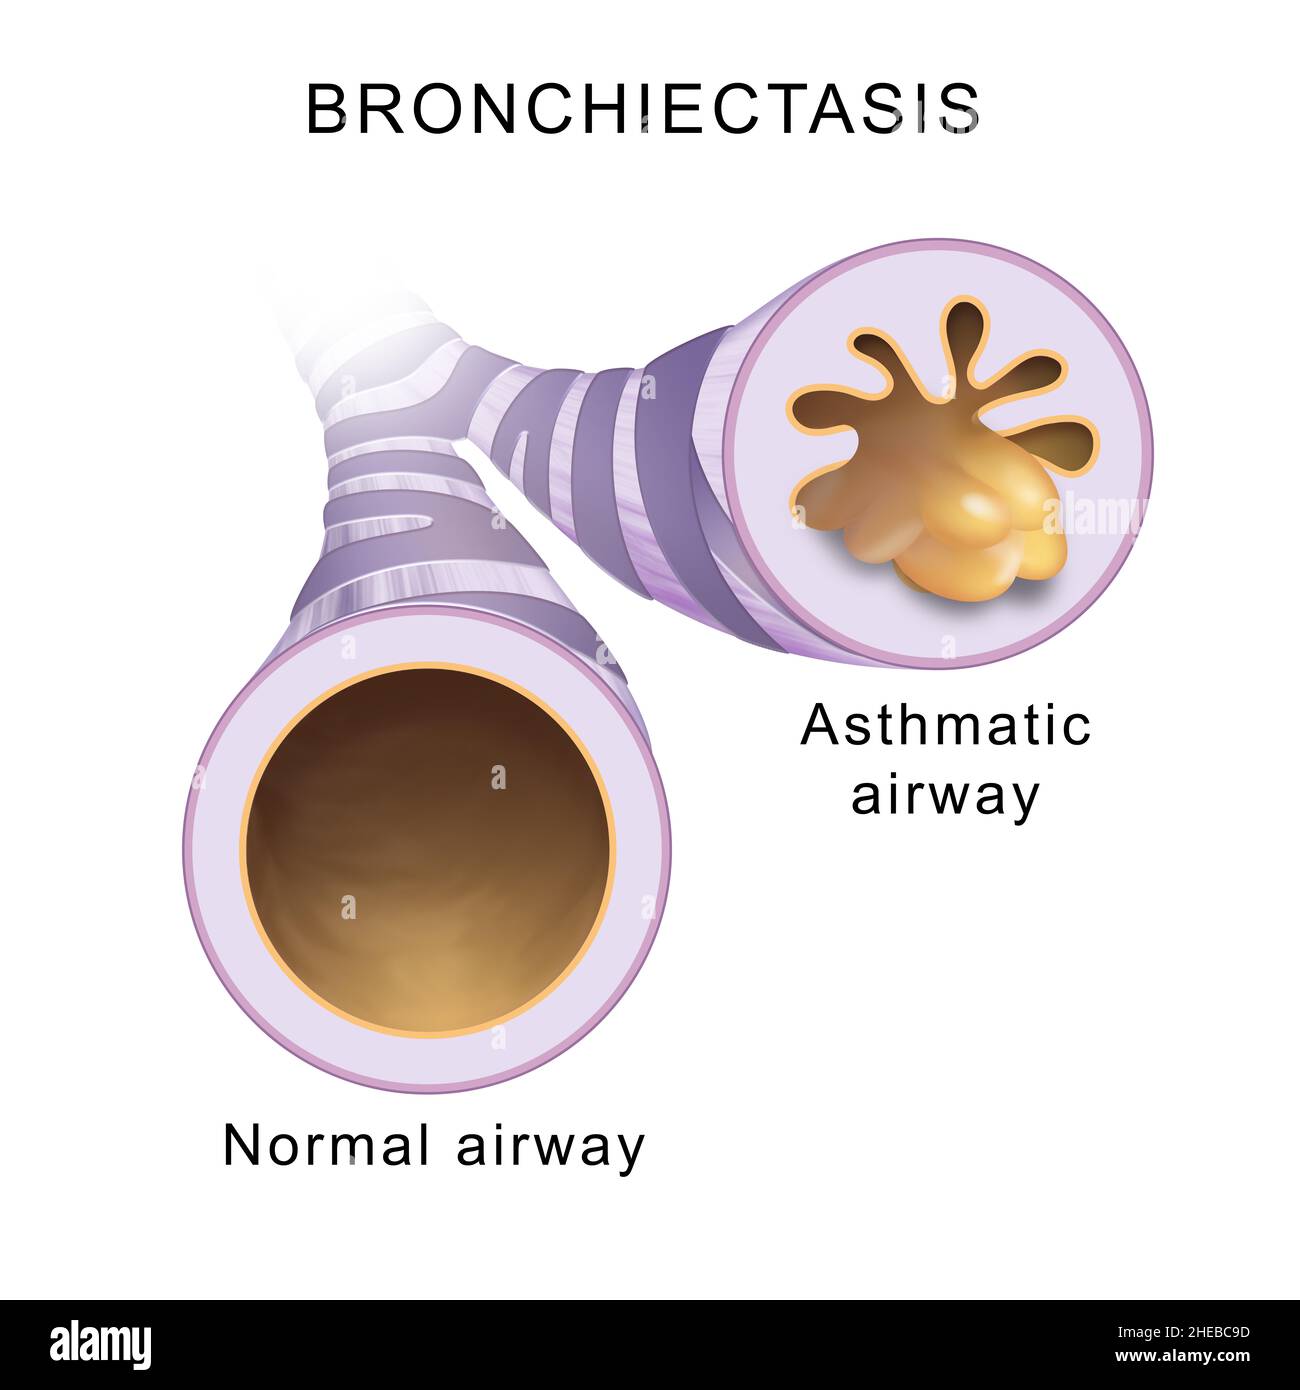 Bronchiectasis. Normal airway and asthmatic airway Stock Photo